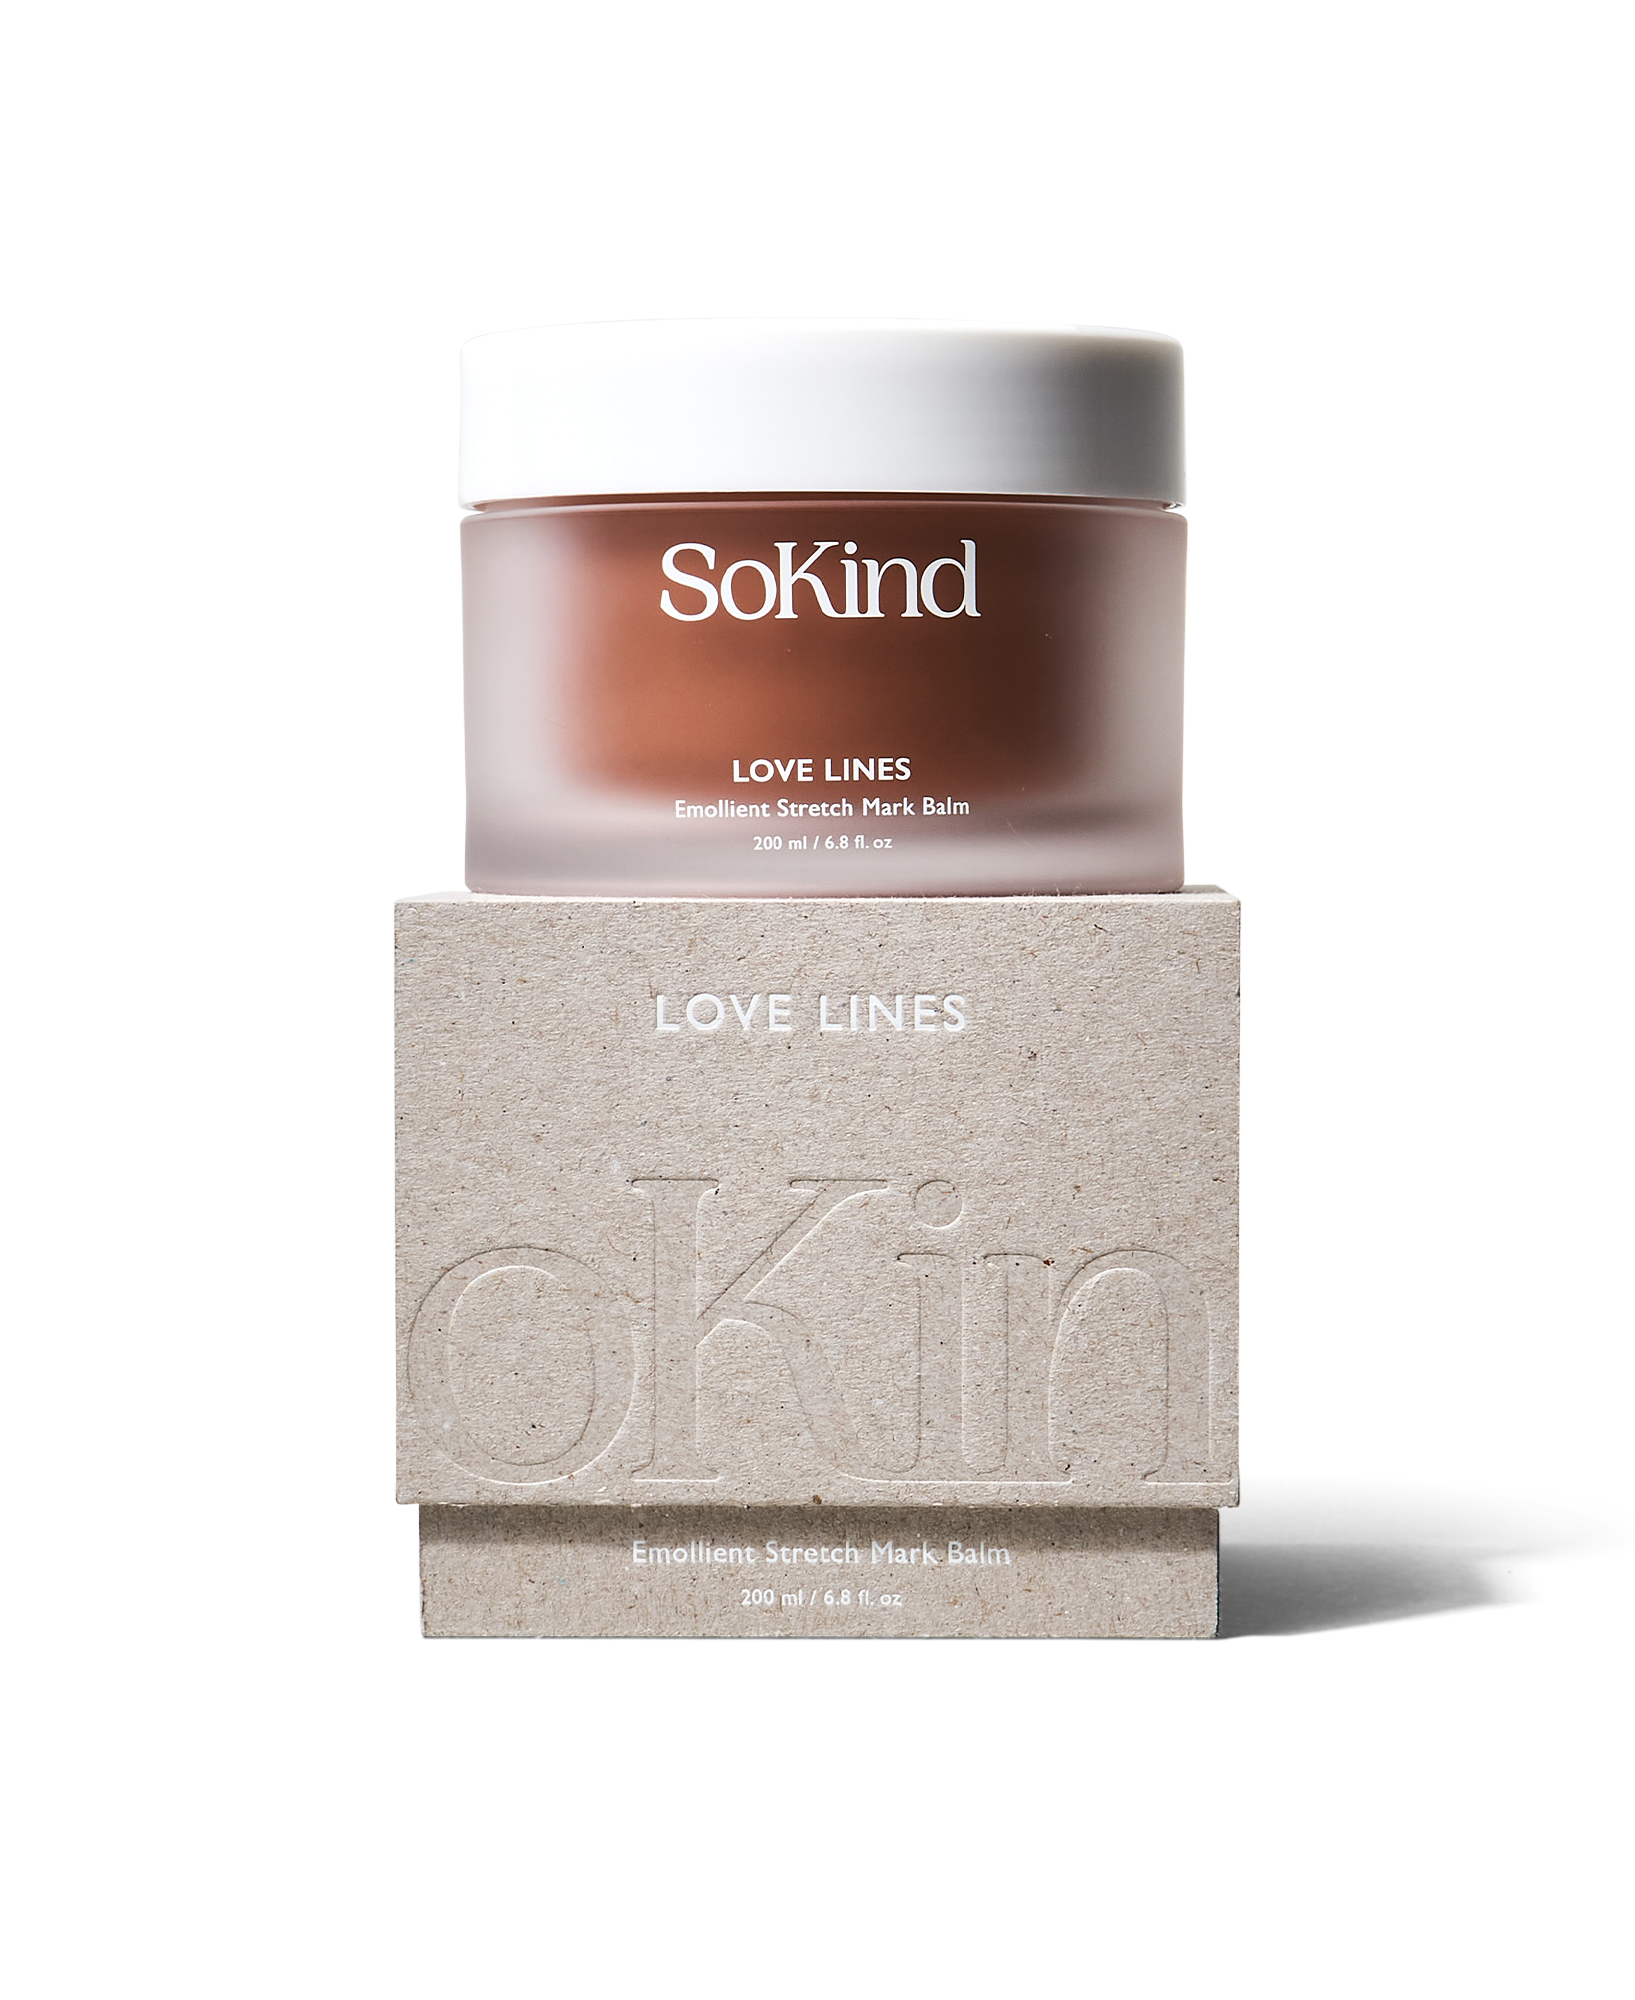 Love Lines from SoKind, a stretch mark balm